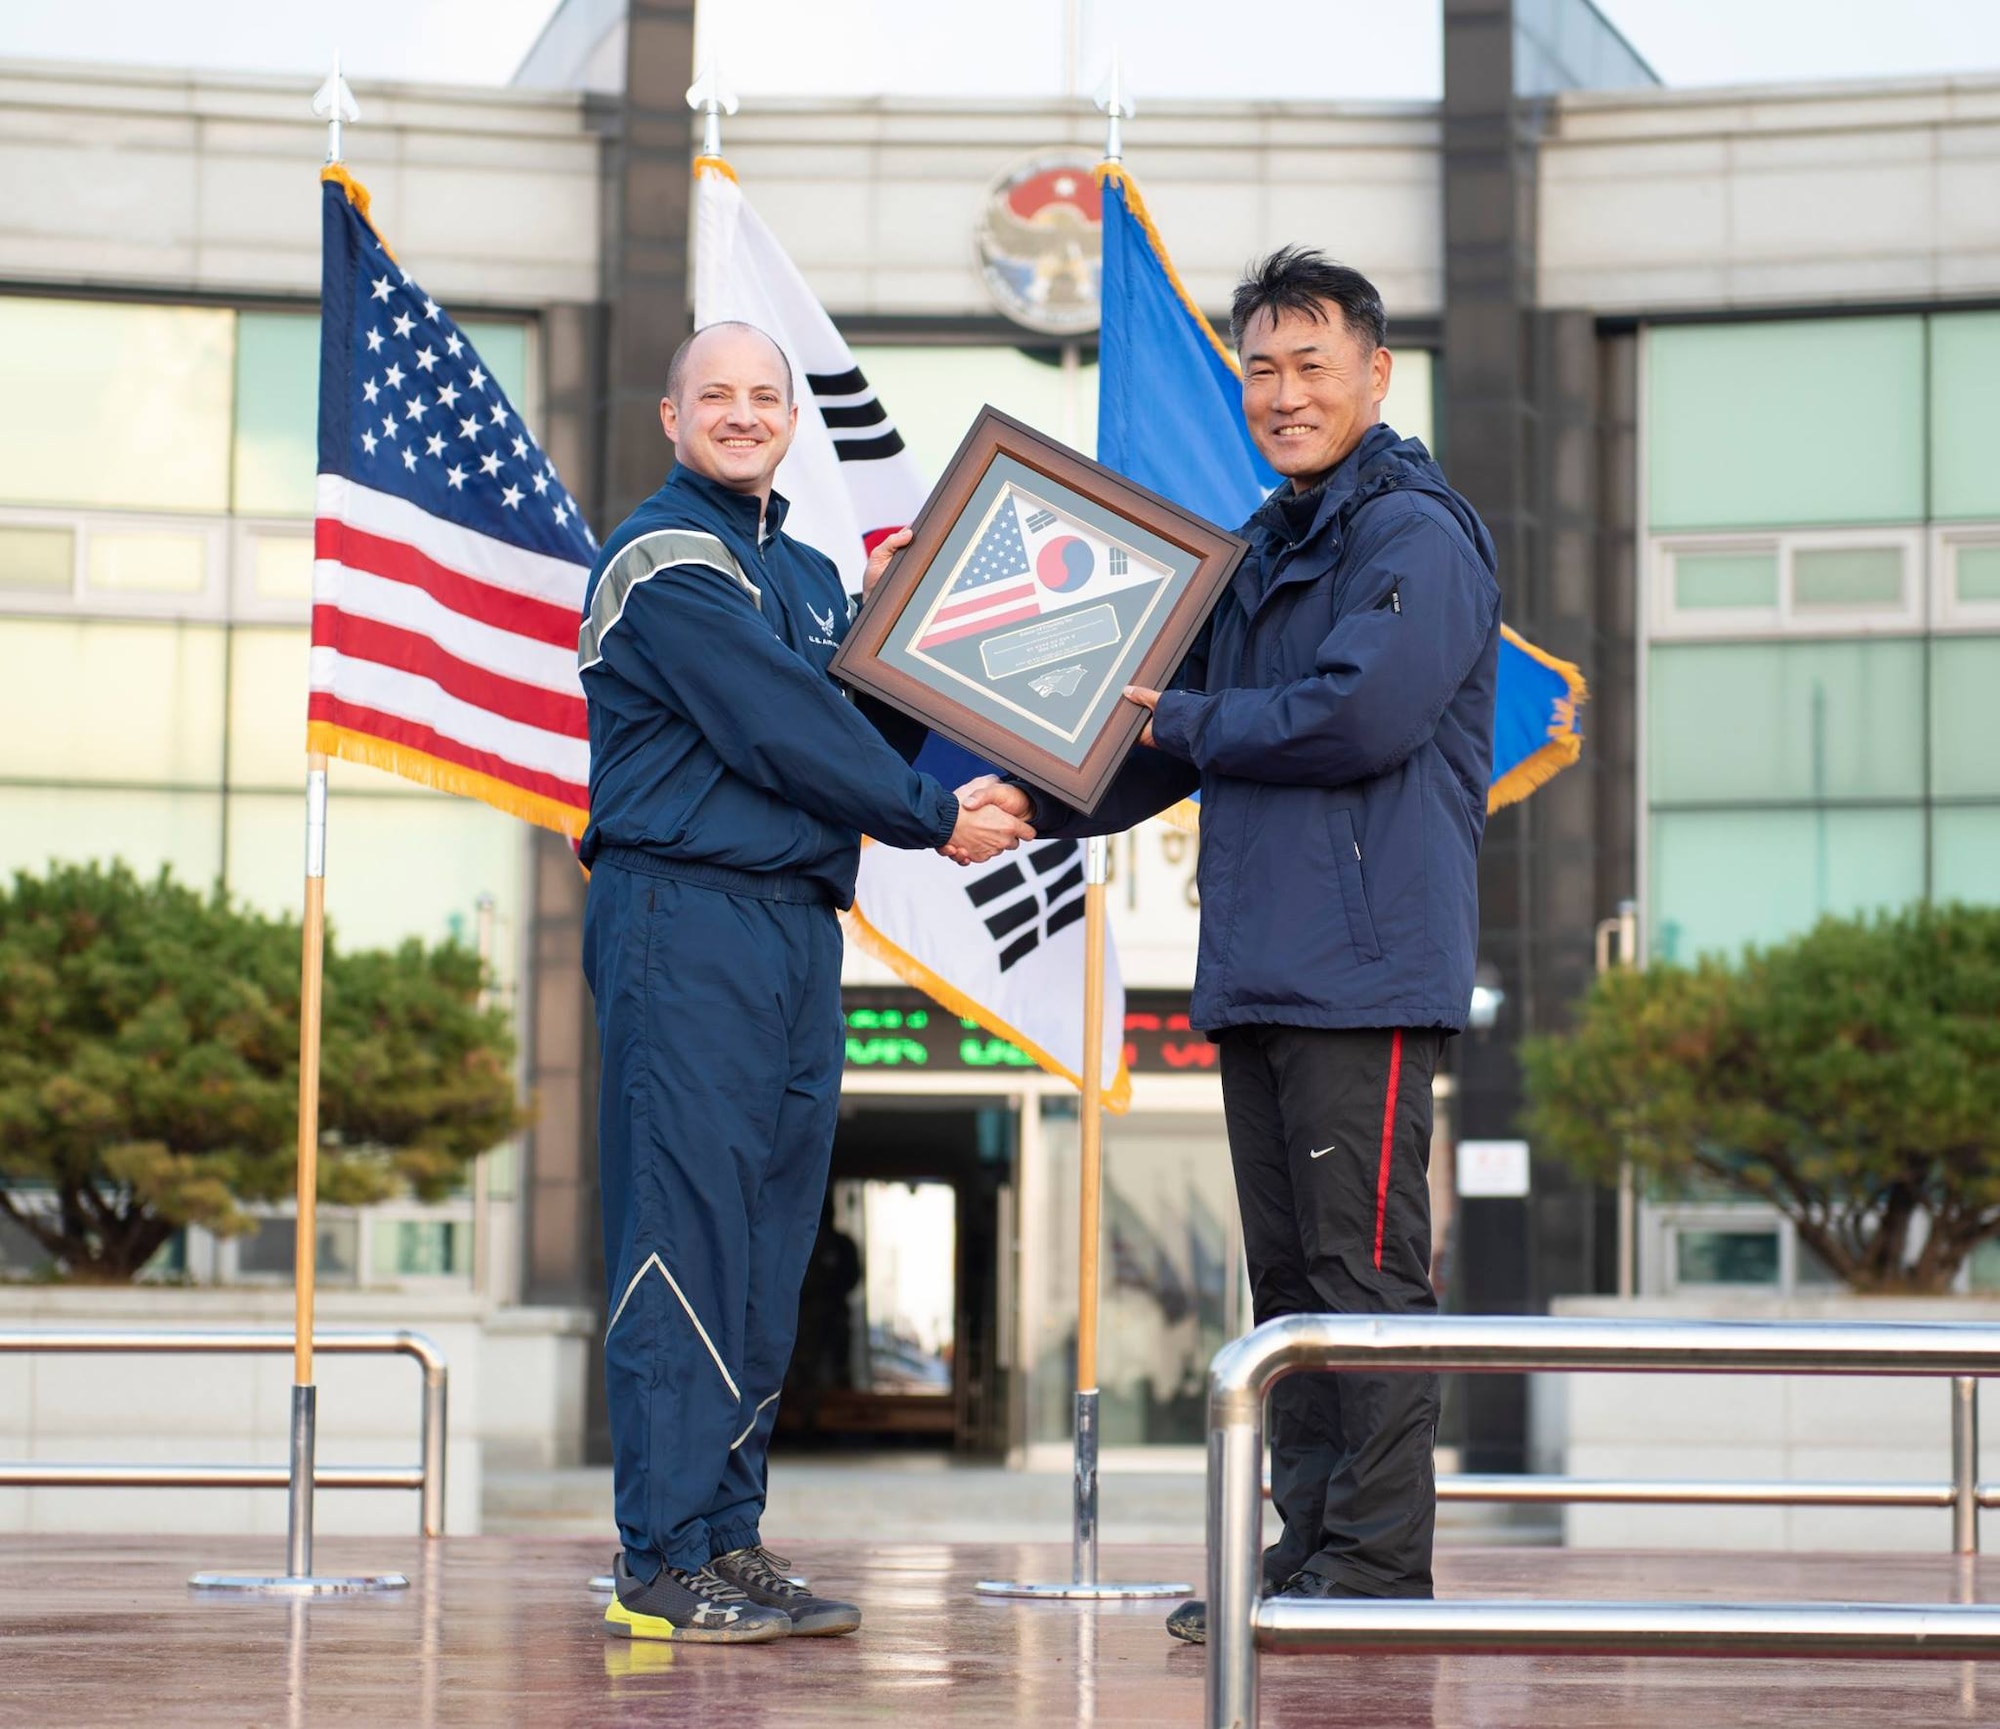 Col. John Bosone, 8th Fighter Wing commander (left), presents Col. Jae-Gyun Jeon, 38th Fighter Group commander (right), with a commemorative plaque at Kunsan Air Base, Republic of Korea, Nov. 9, 2018. The US-ROKAF Friendship Day focused on celebrating the partnership and alliance between the 8th Fighter Wing and 38th Fighter Group, who participated in several sporting events and competitions throughout the day. (U.S. Air Force photo by Senior Airman Stefan Alvarez)